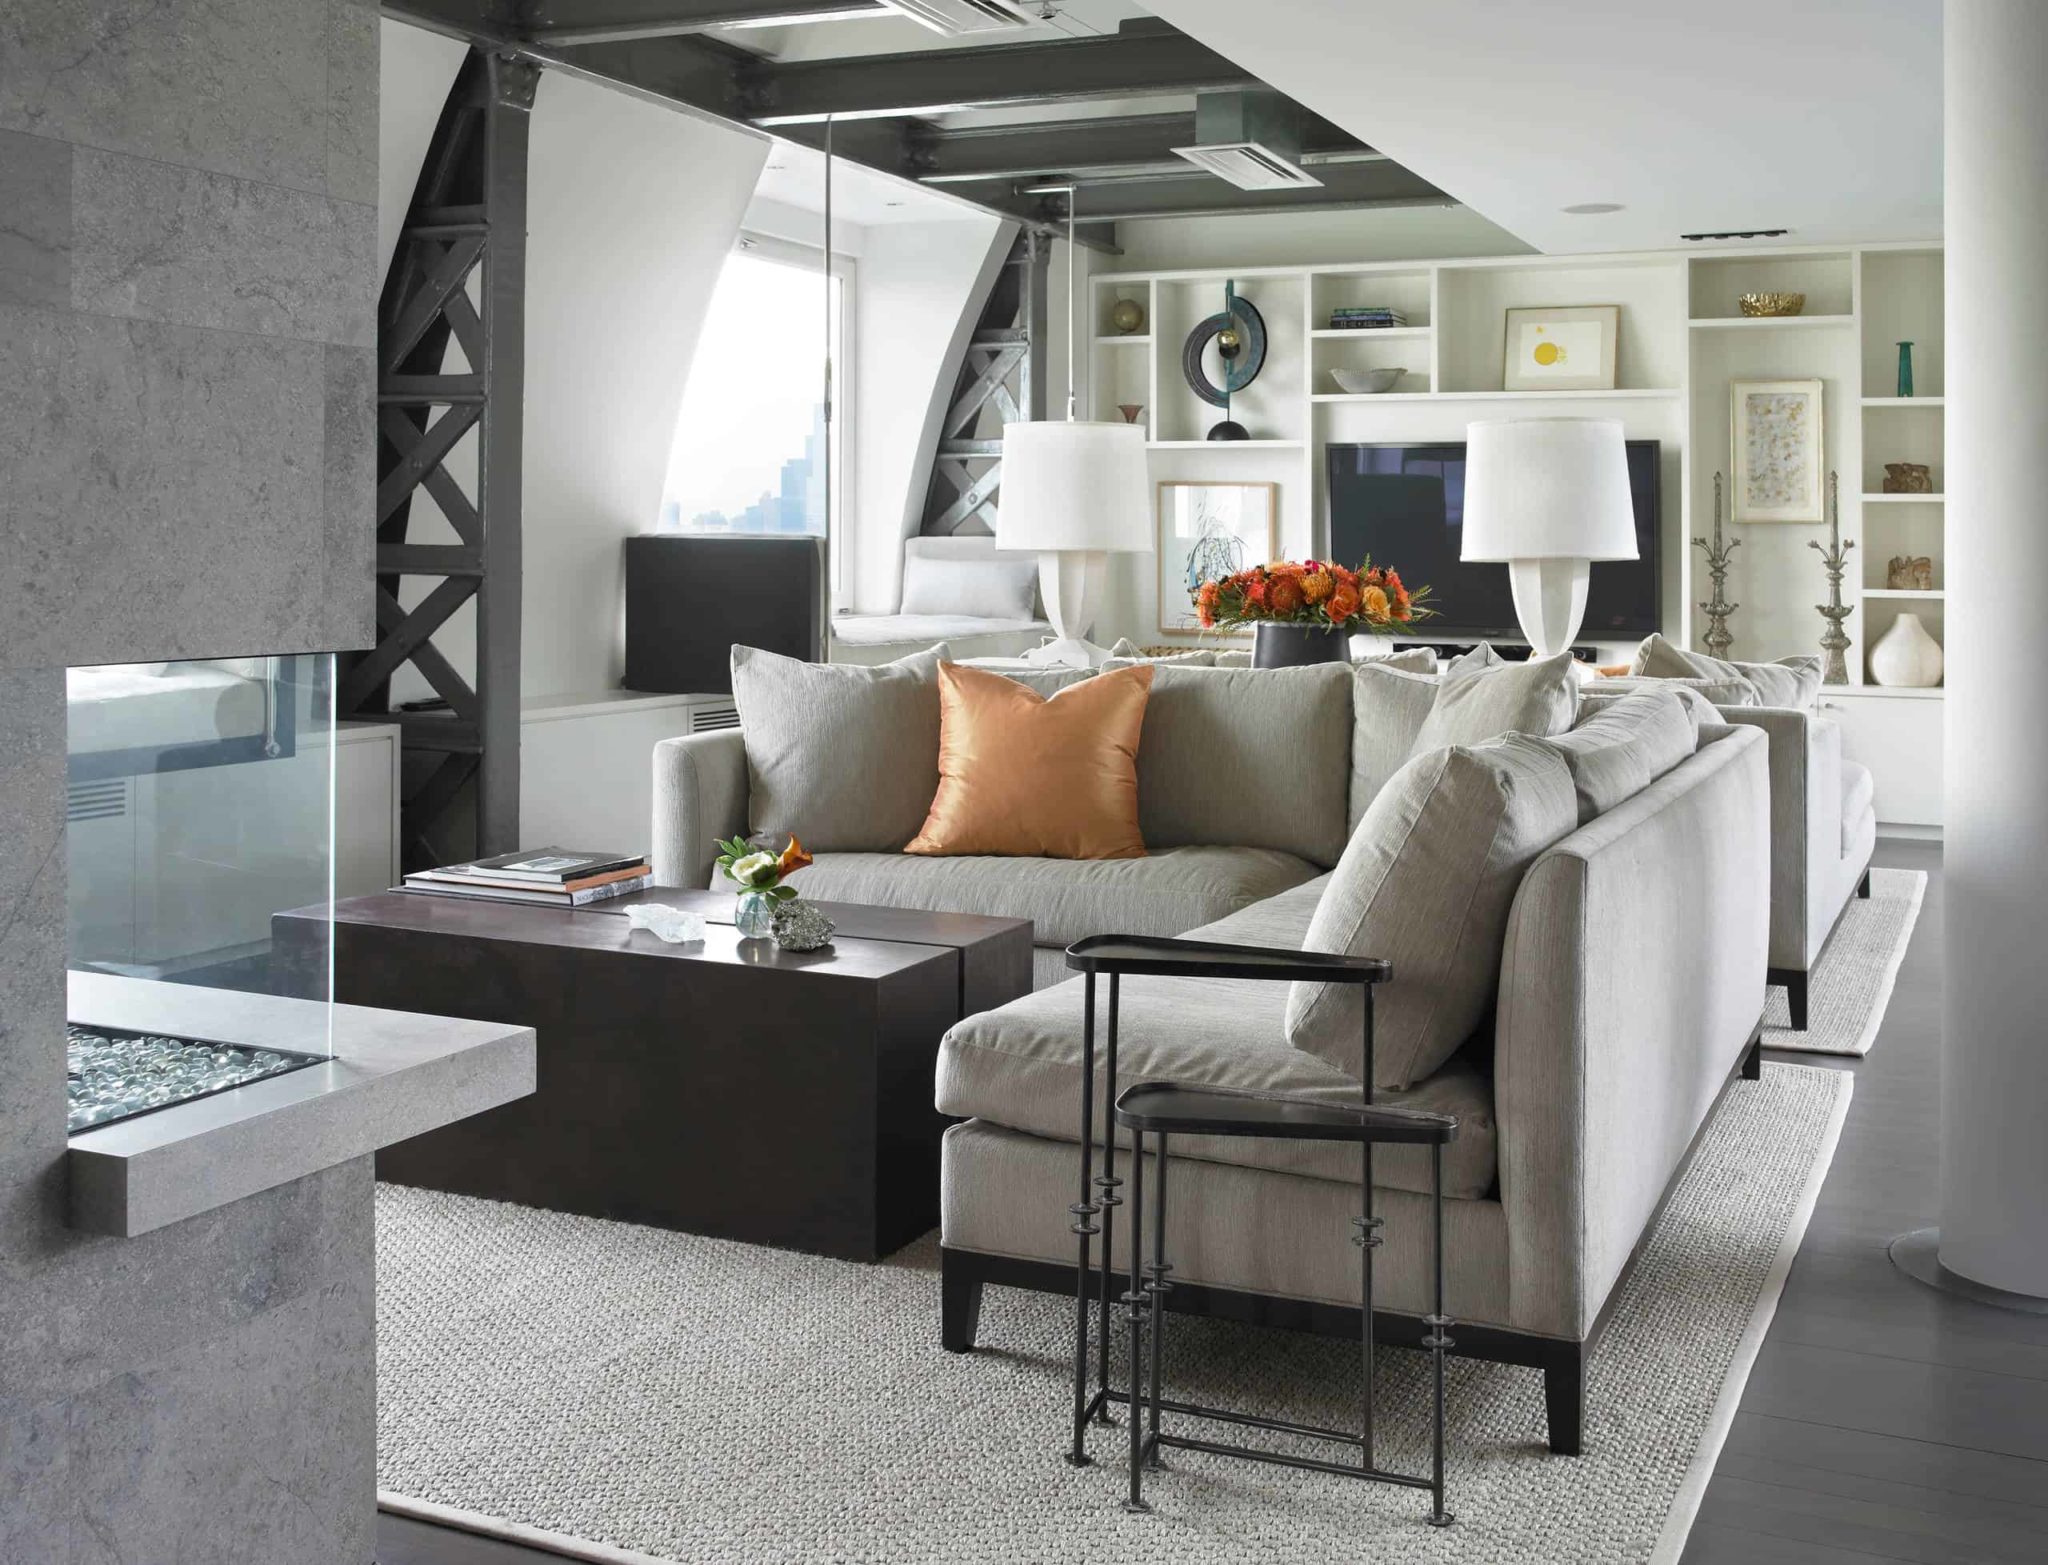 23 Gray Couch Living Room Ideas - Best Rooms with Gray Couches